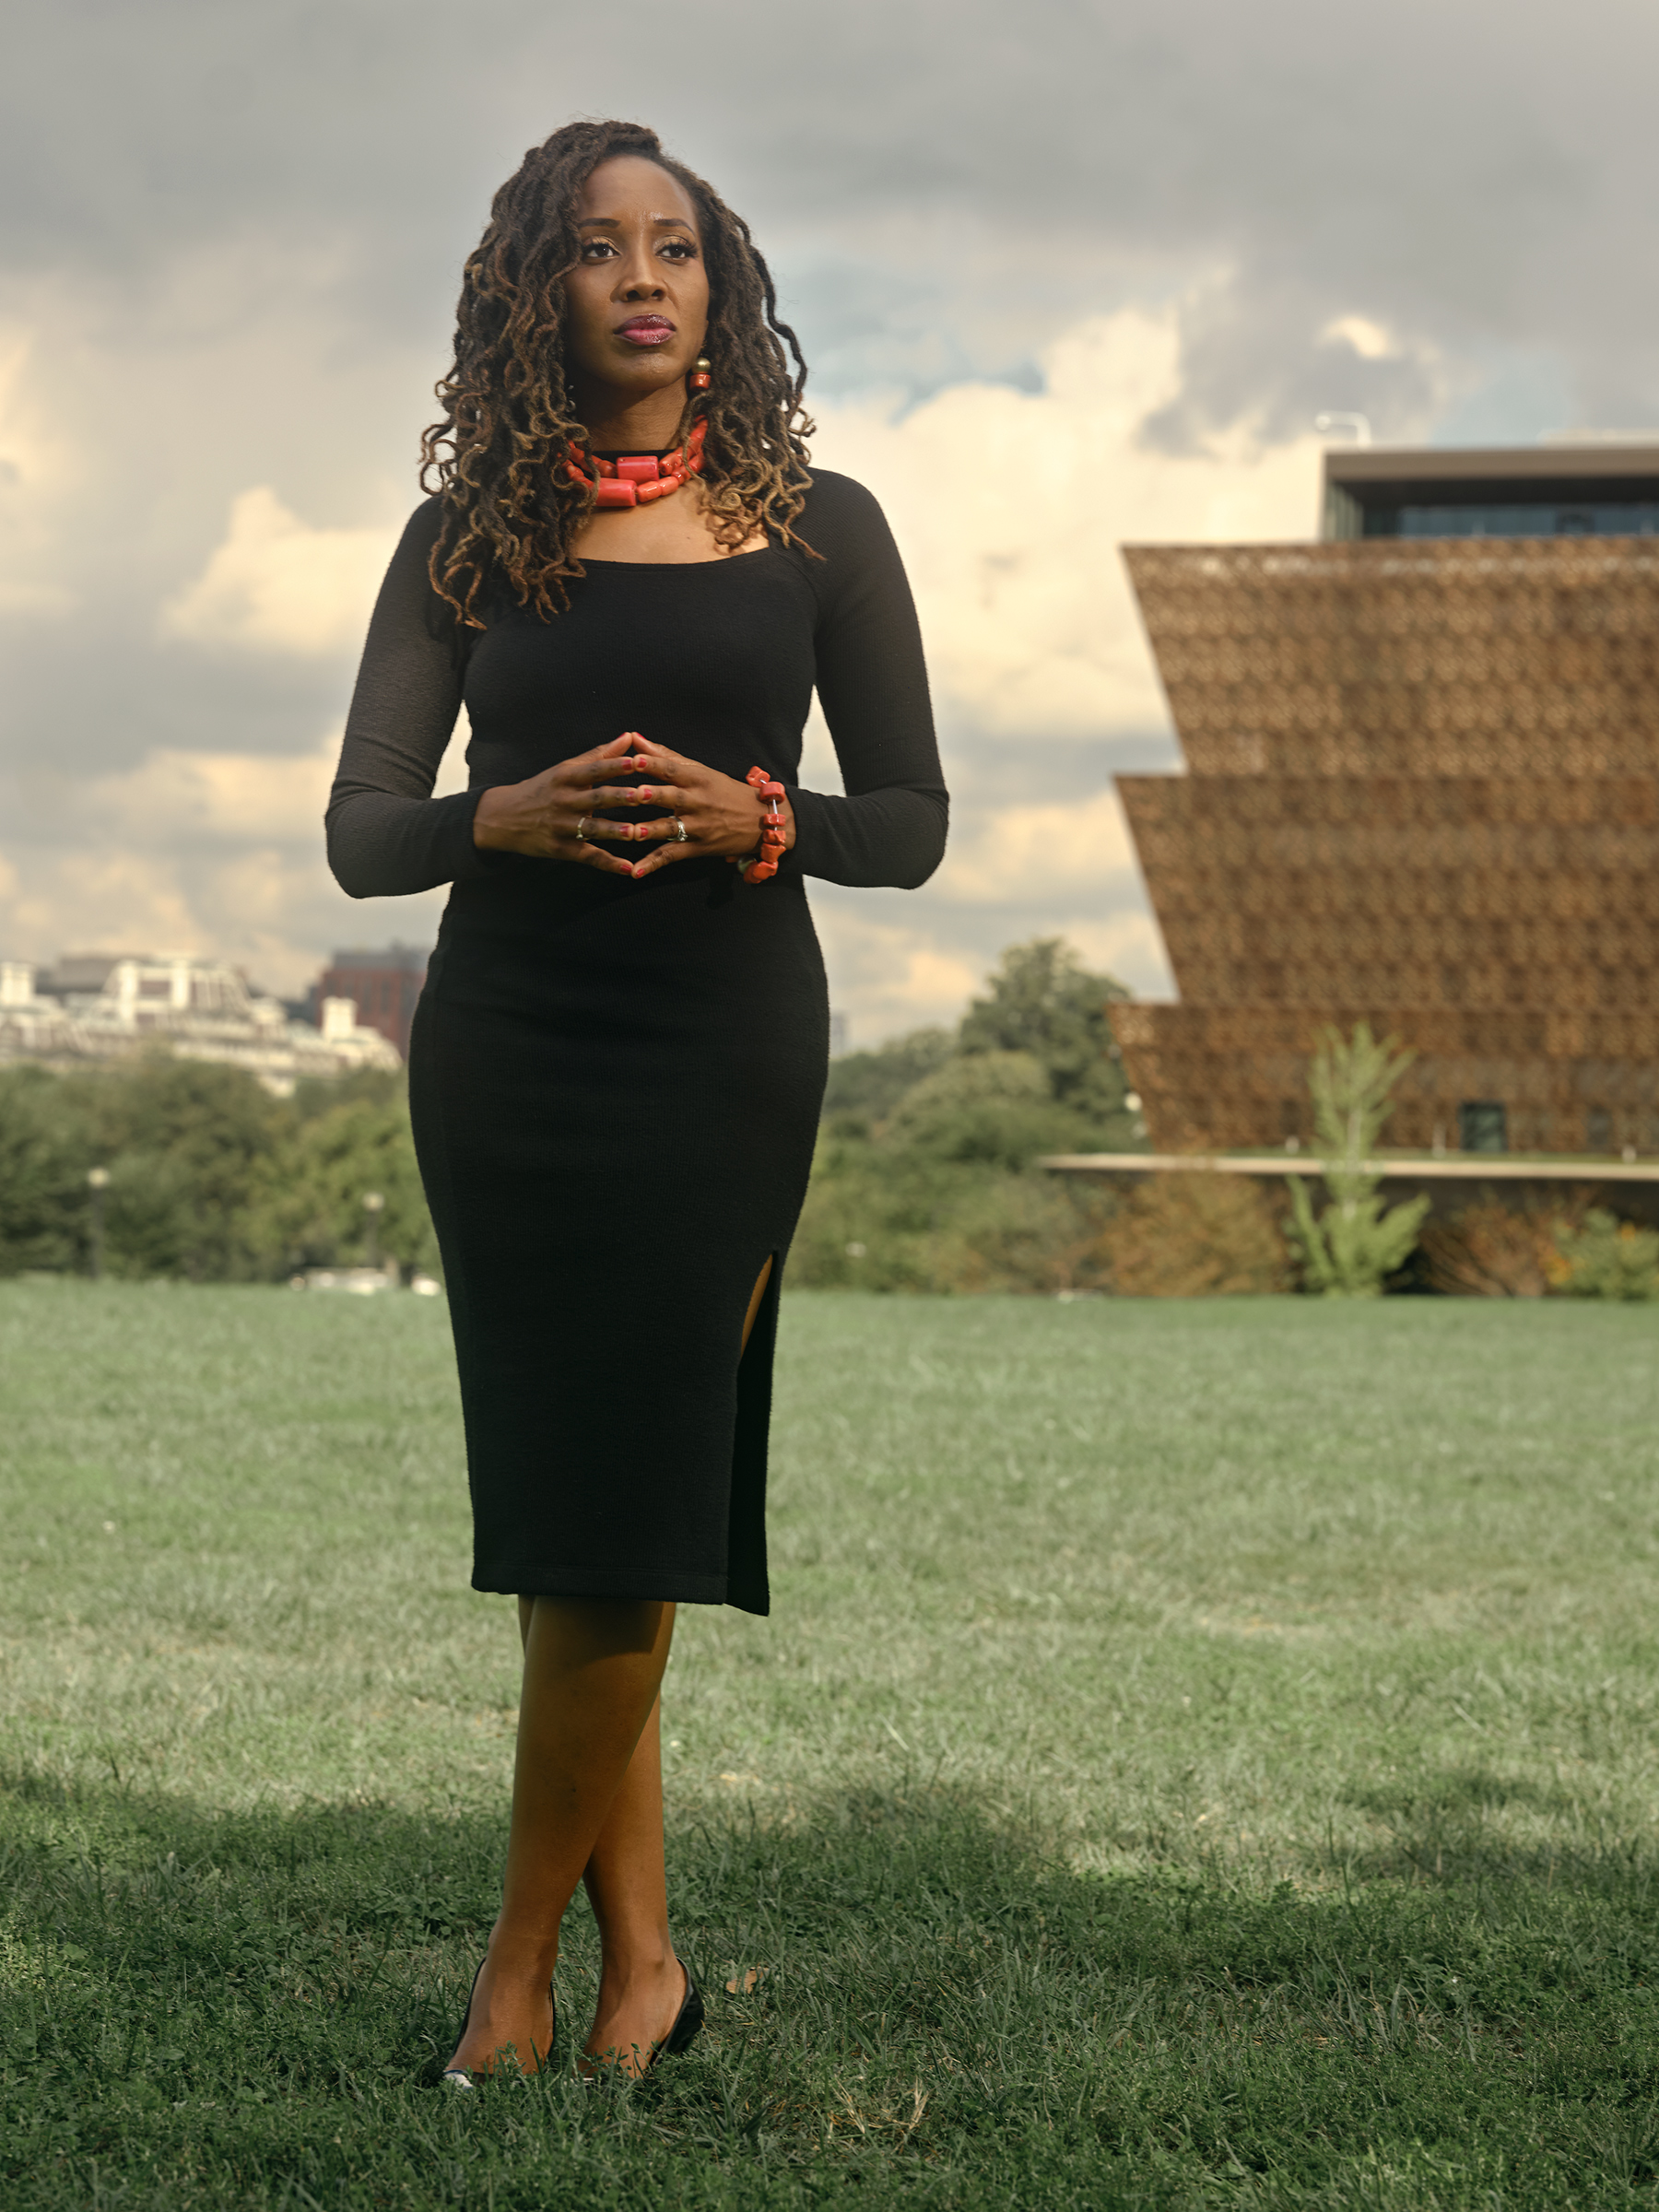 Charlene Fadirepo, a banker and former government regulator, near the National Museum of African American History and Culture